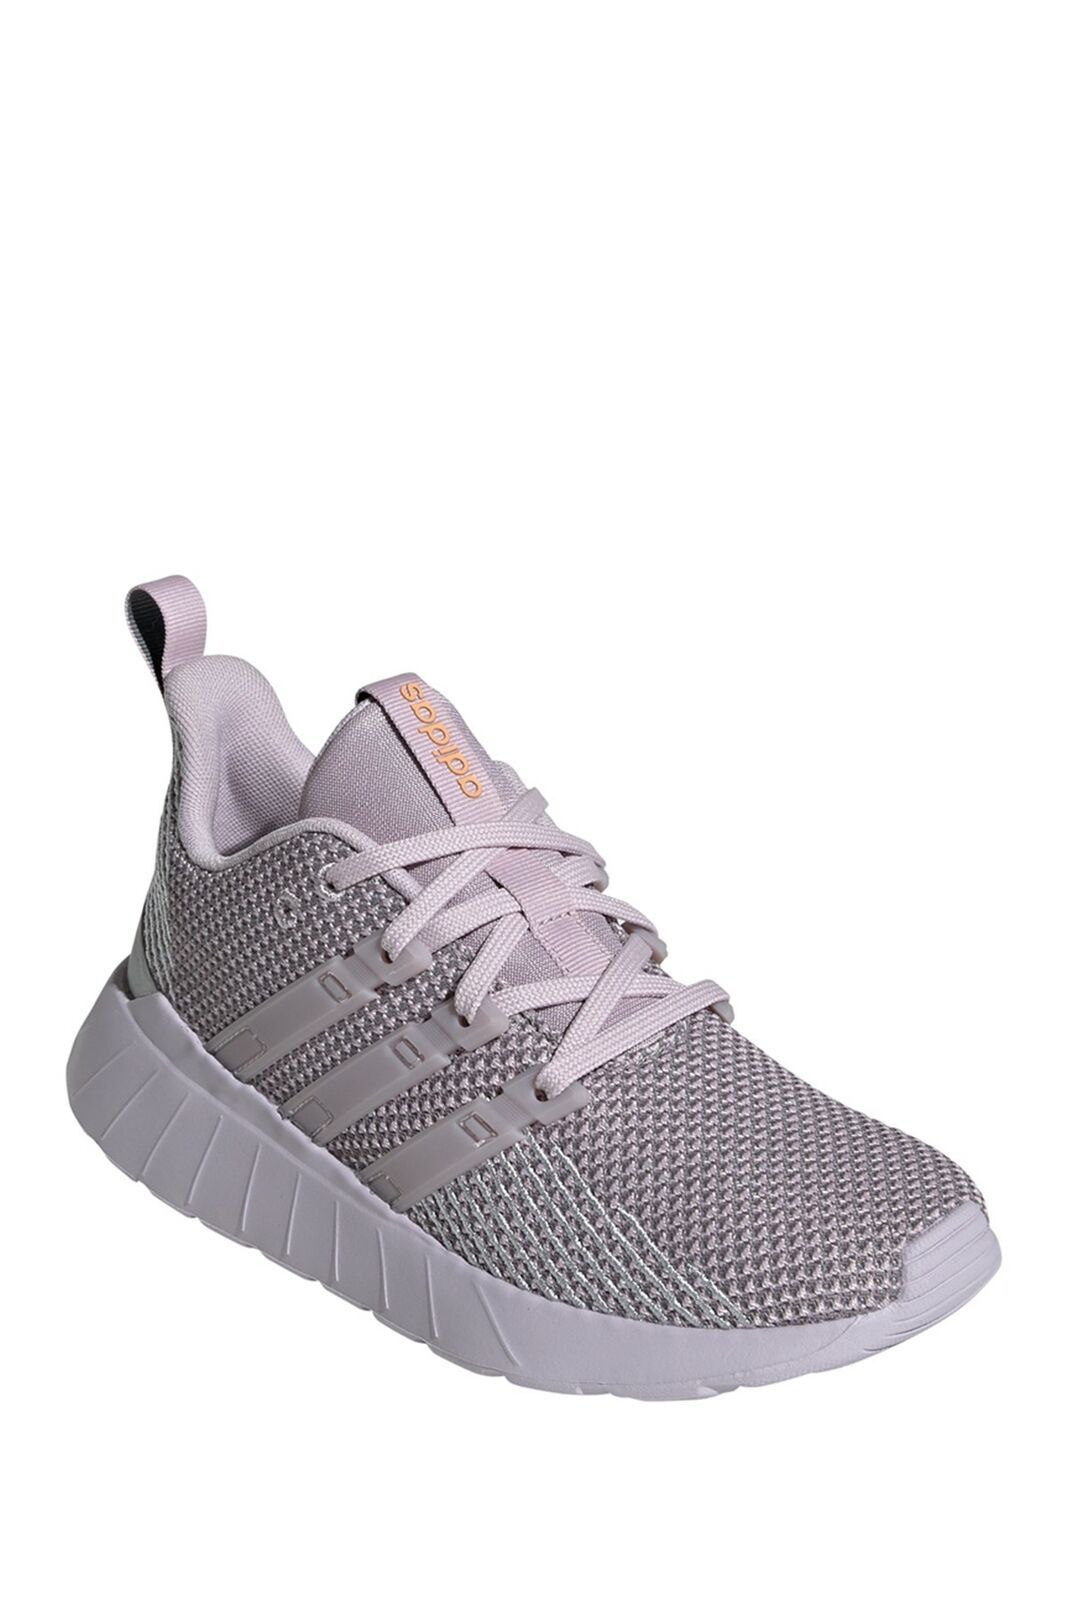 Adidas Questar Flow Kids Running Sneakers Size US 6 Mauve Pink - $32.94